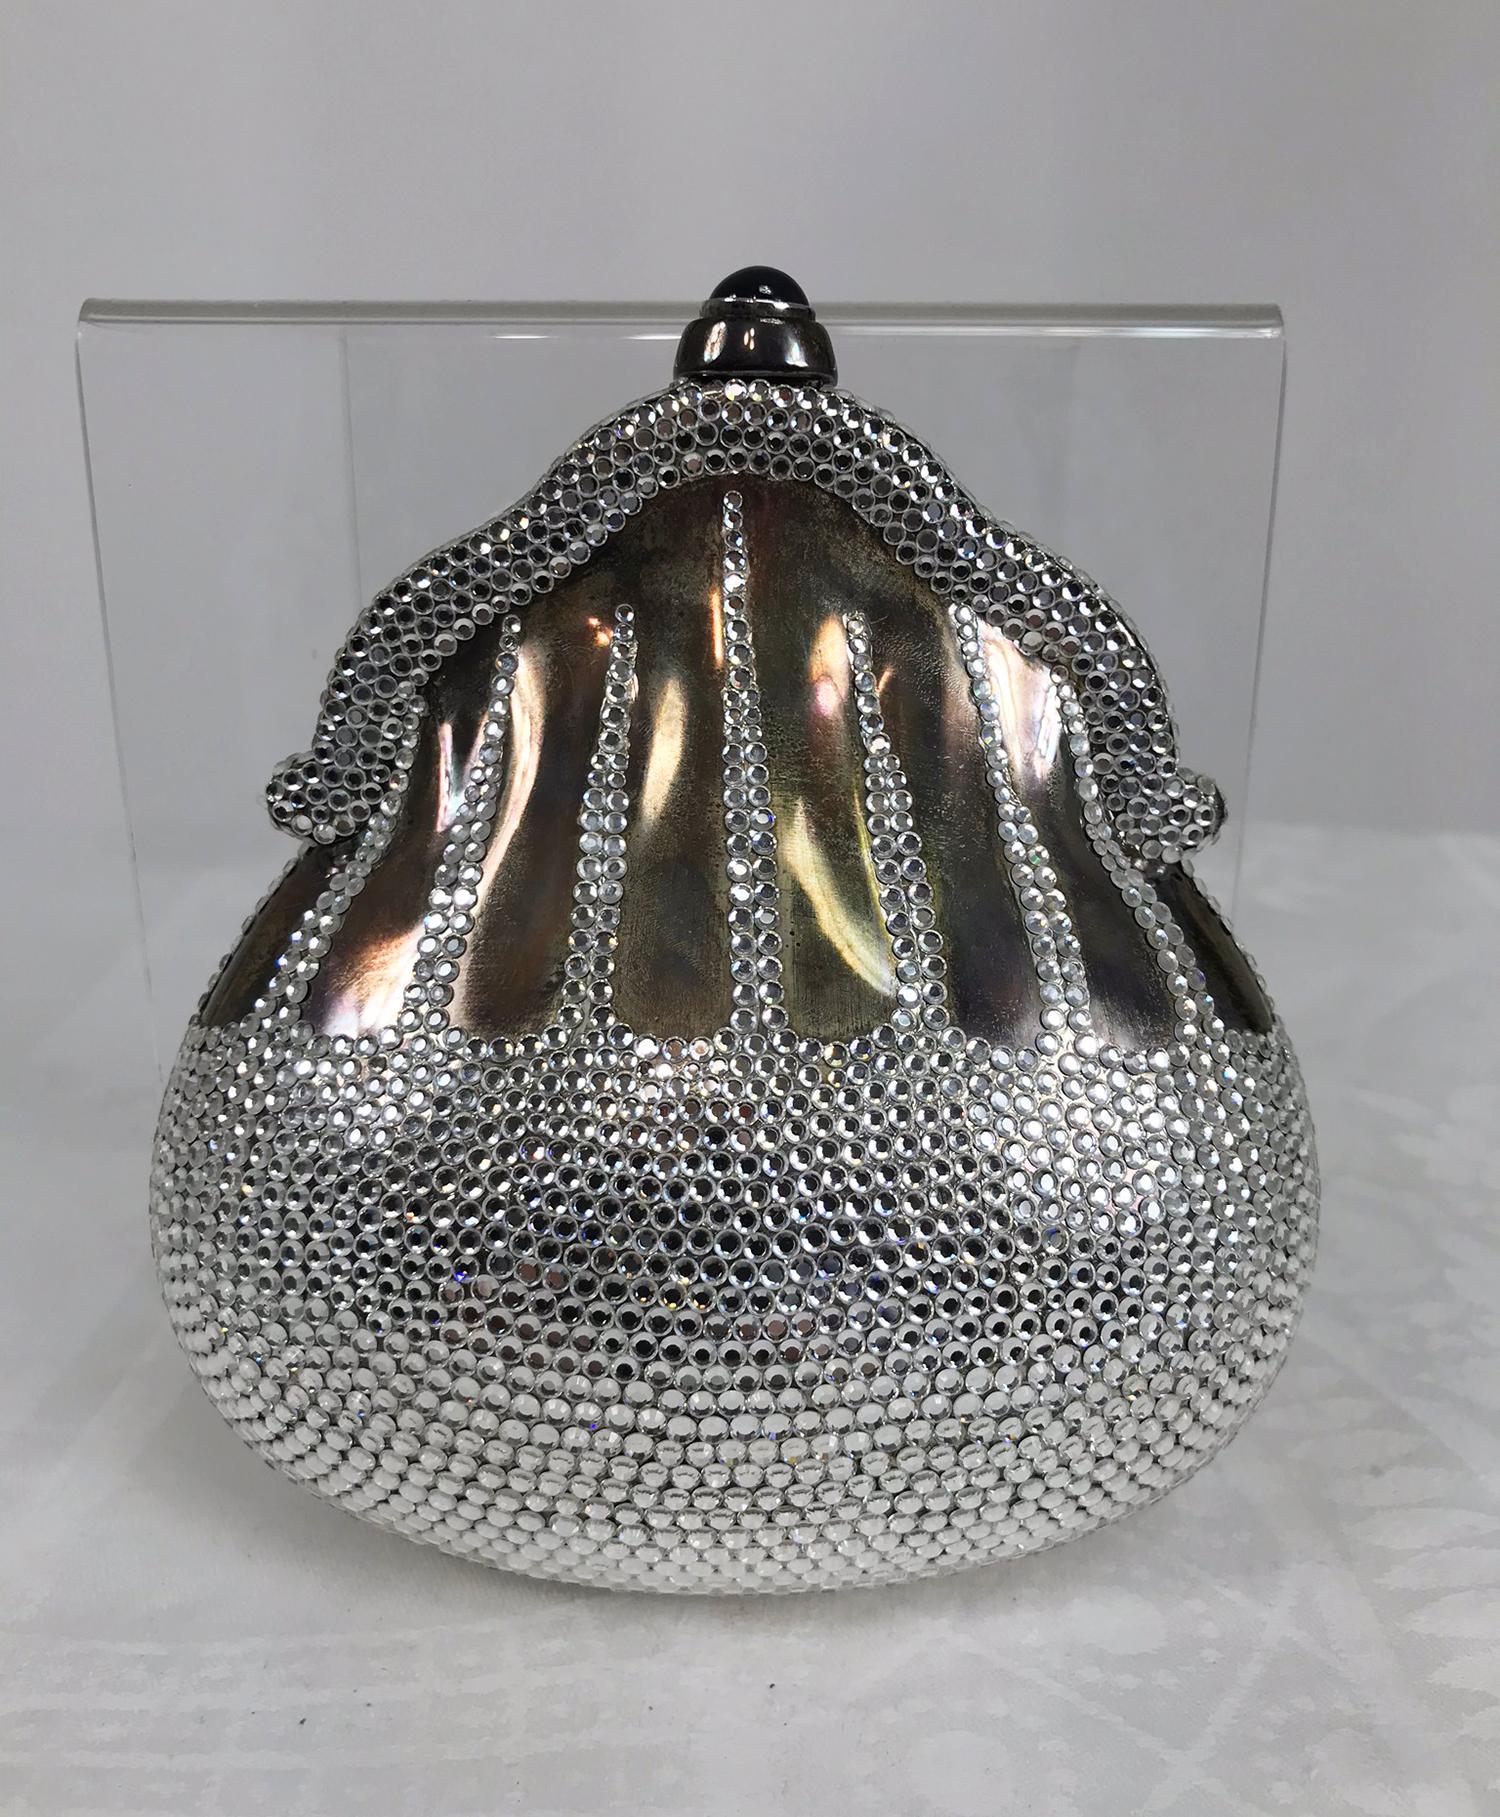 Judith Leiber 35th Anniversary chatelaine sterling silver evening bag set with a 5 carat natural sapphire cabochon clasp. This amazing bag comes in a large black velvet satin lined presentation box, it is quite heavy. The bag is set with 3.000